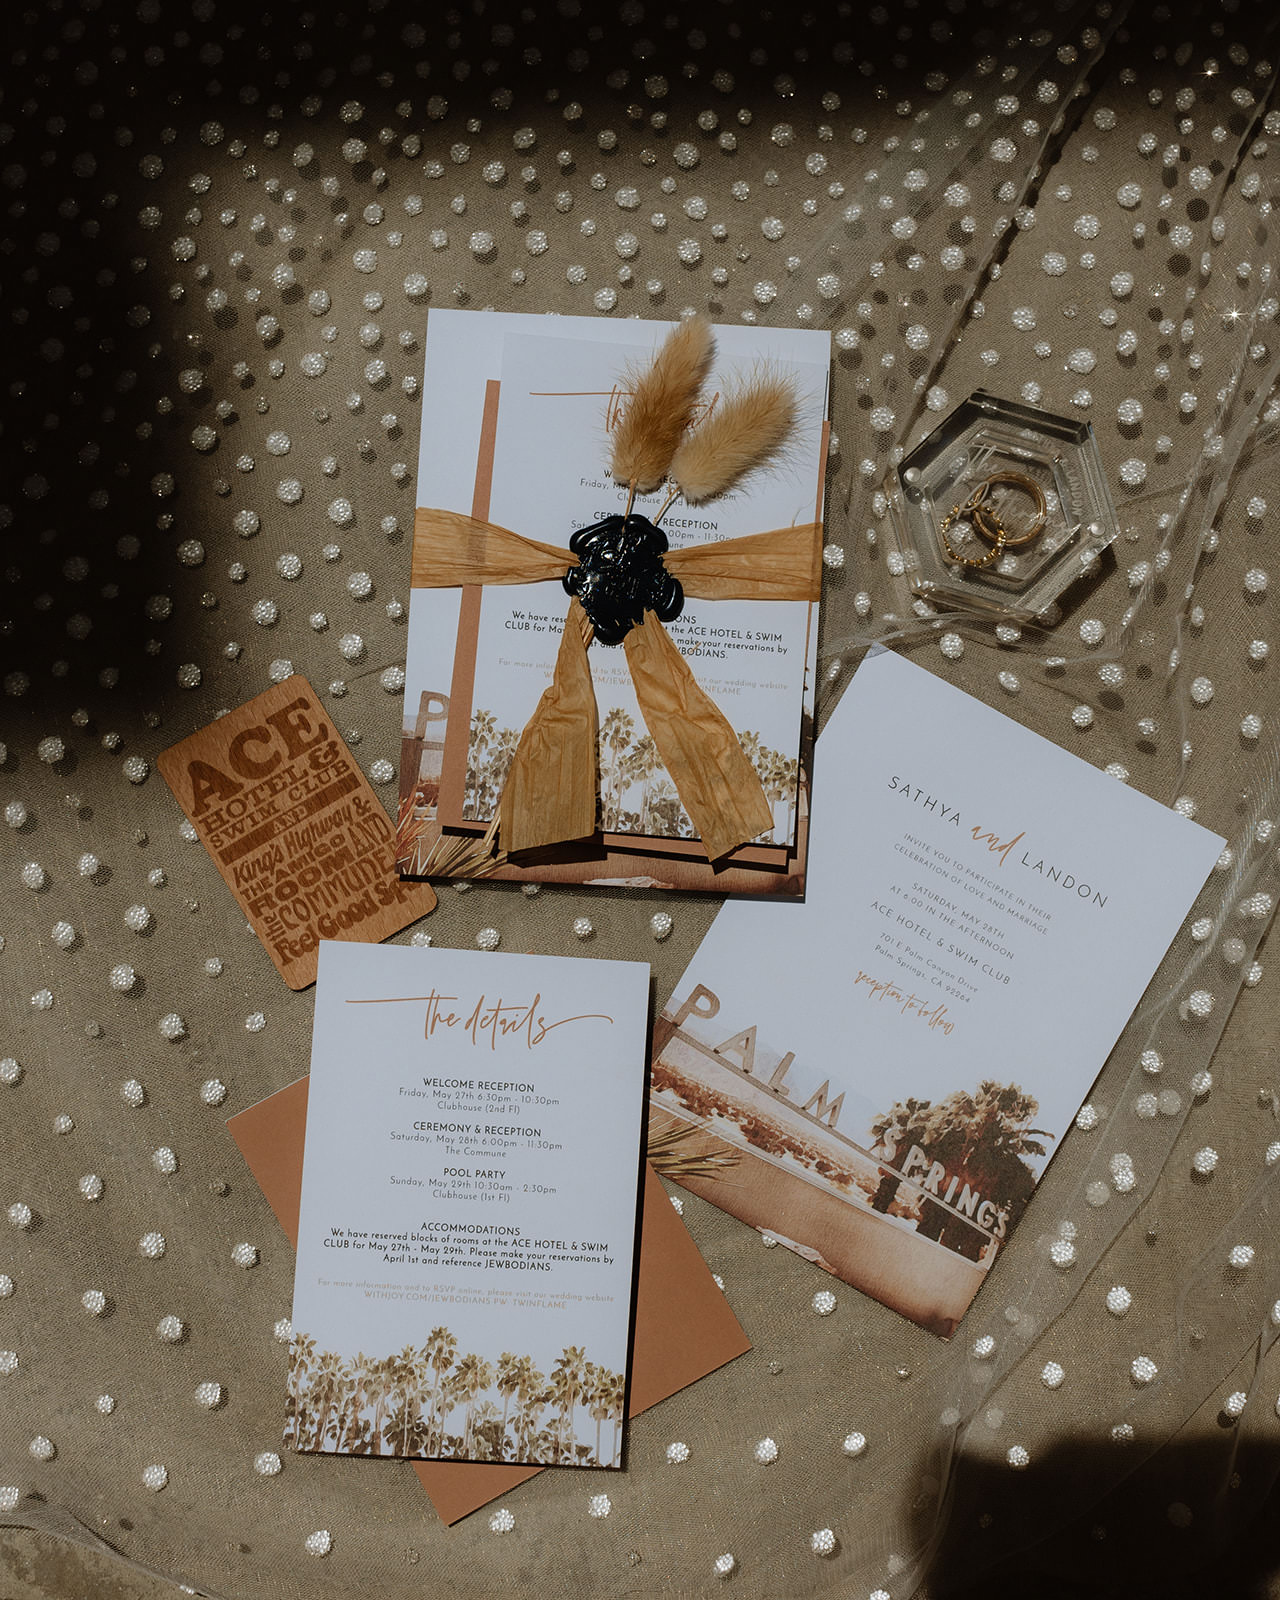 Gorgeous flatlay shot of invitations and wedding rings on a textured background.